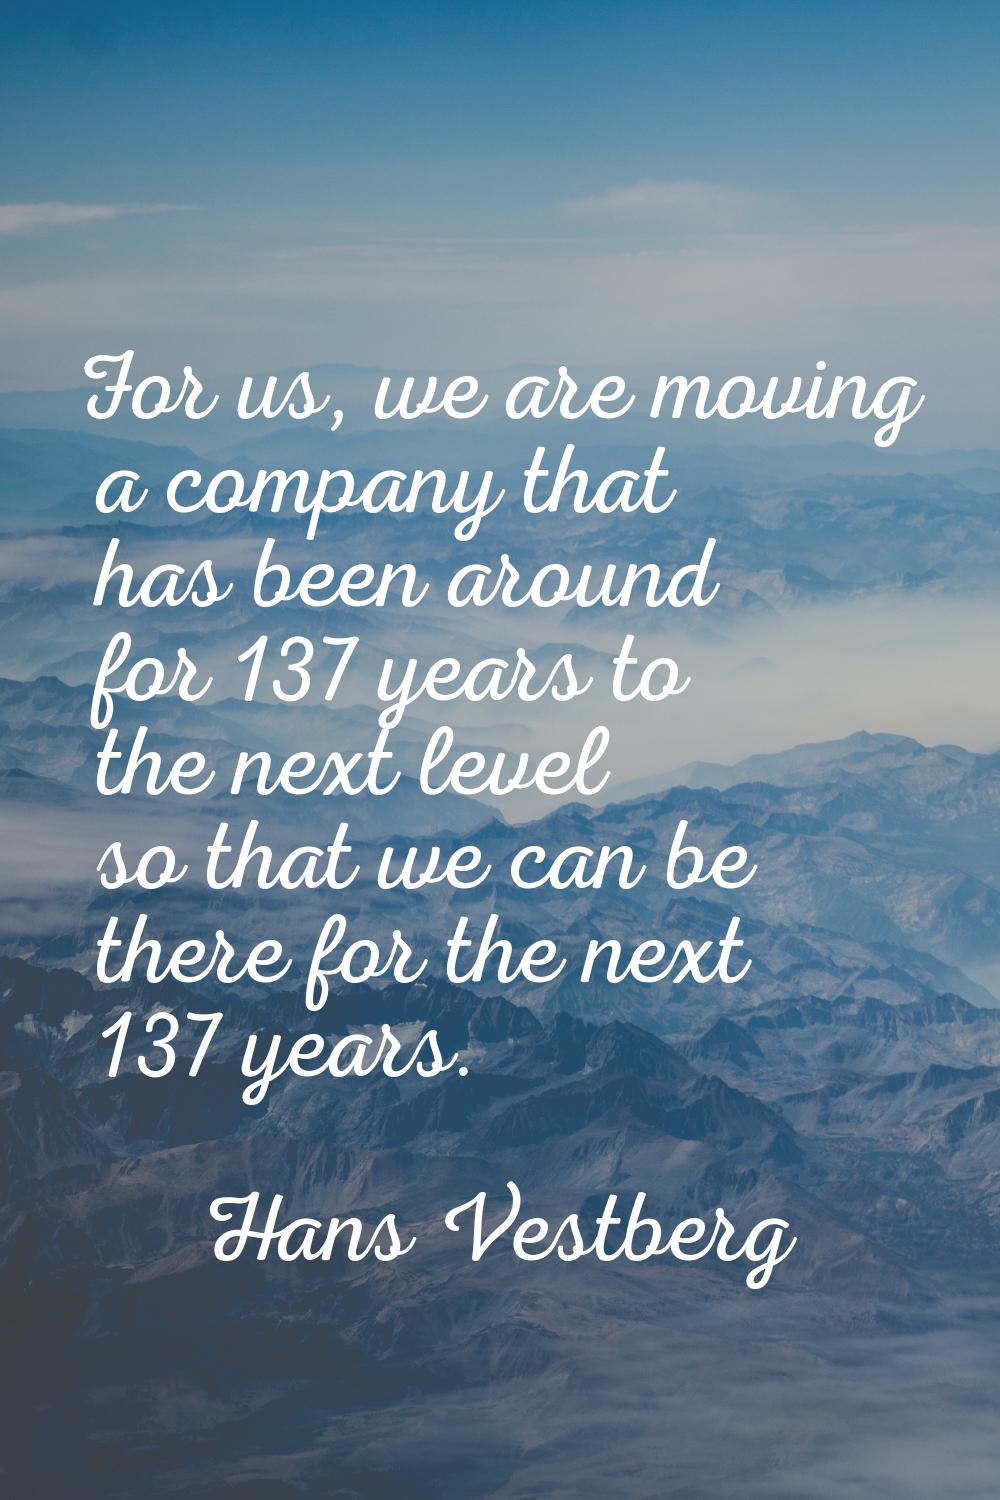 For us, we are moving a company that has been around for 137 years to the next level so that we can